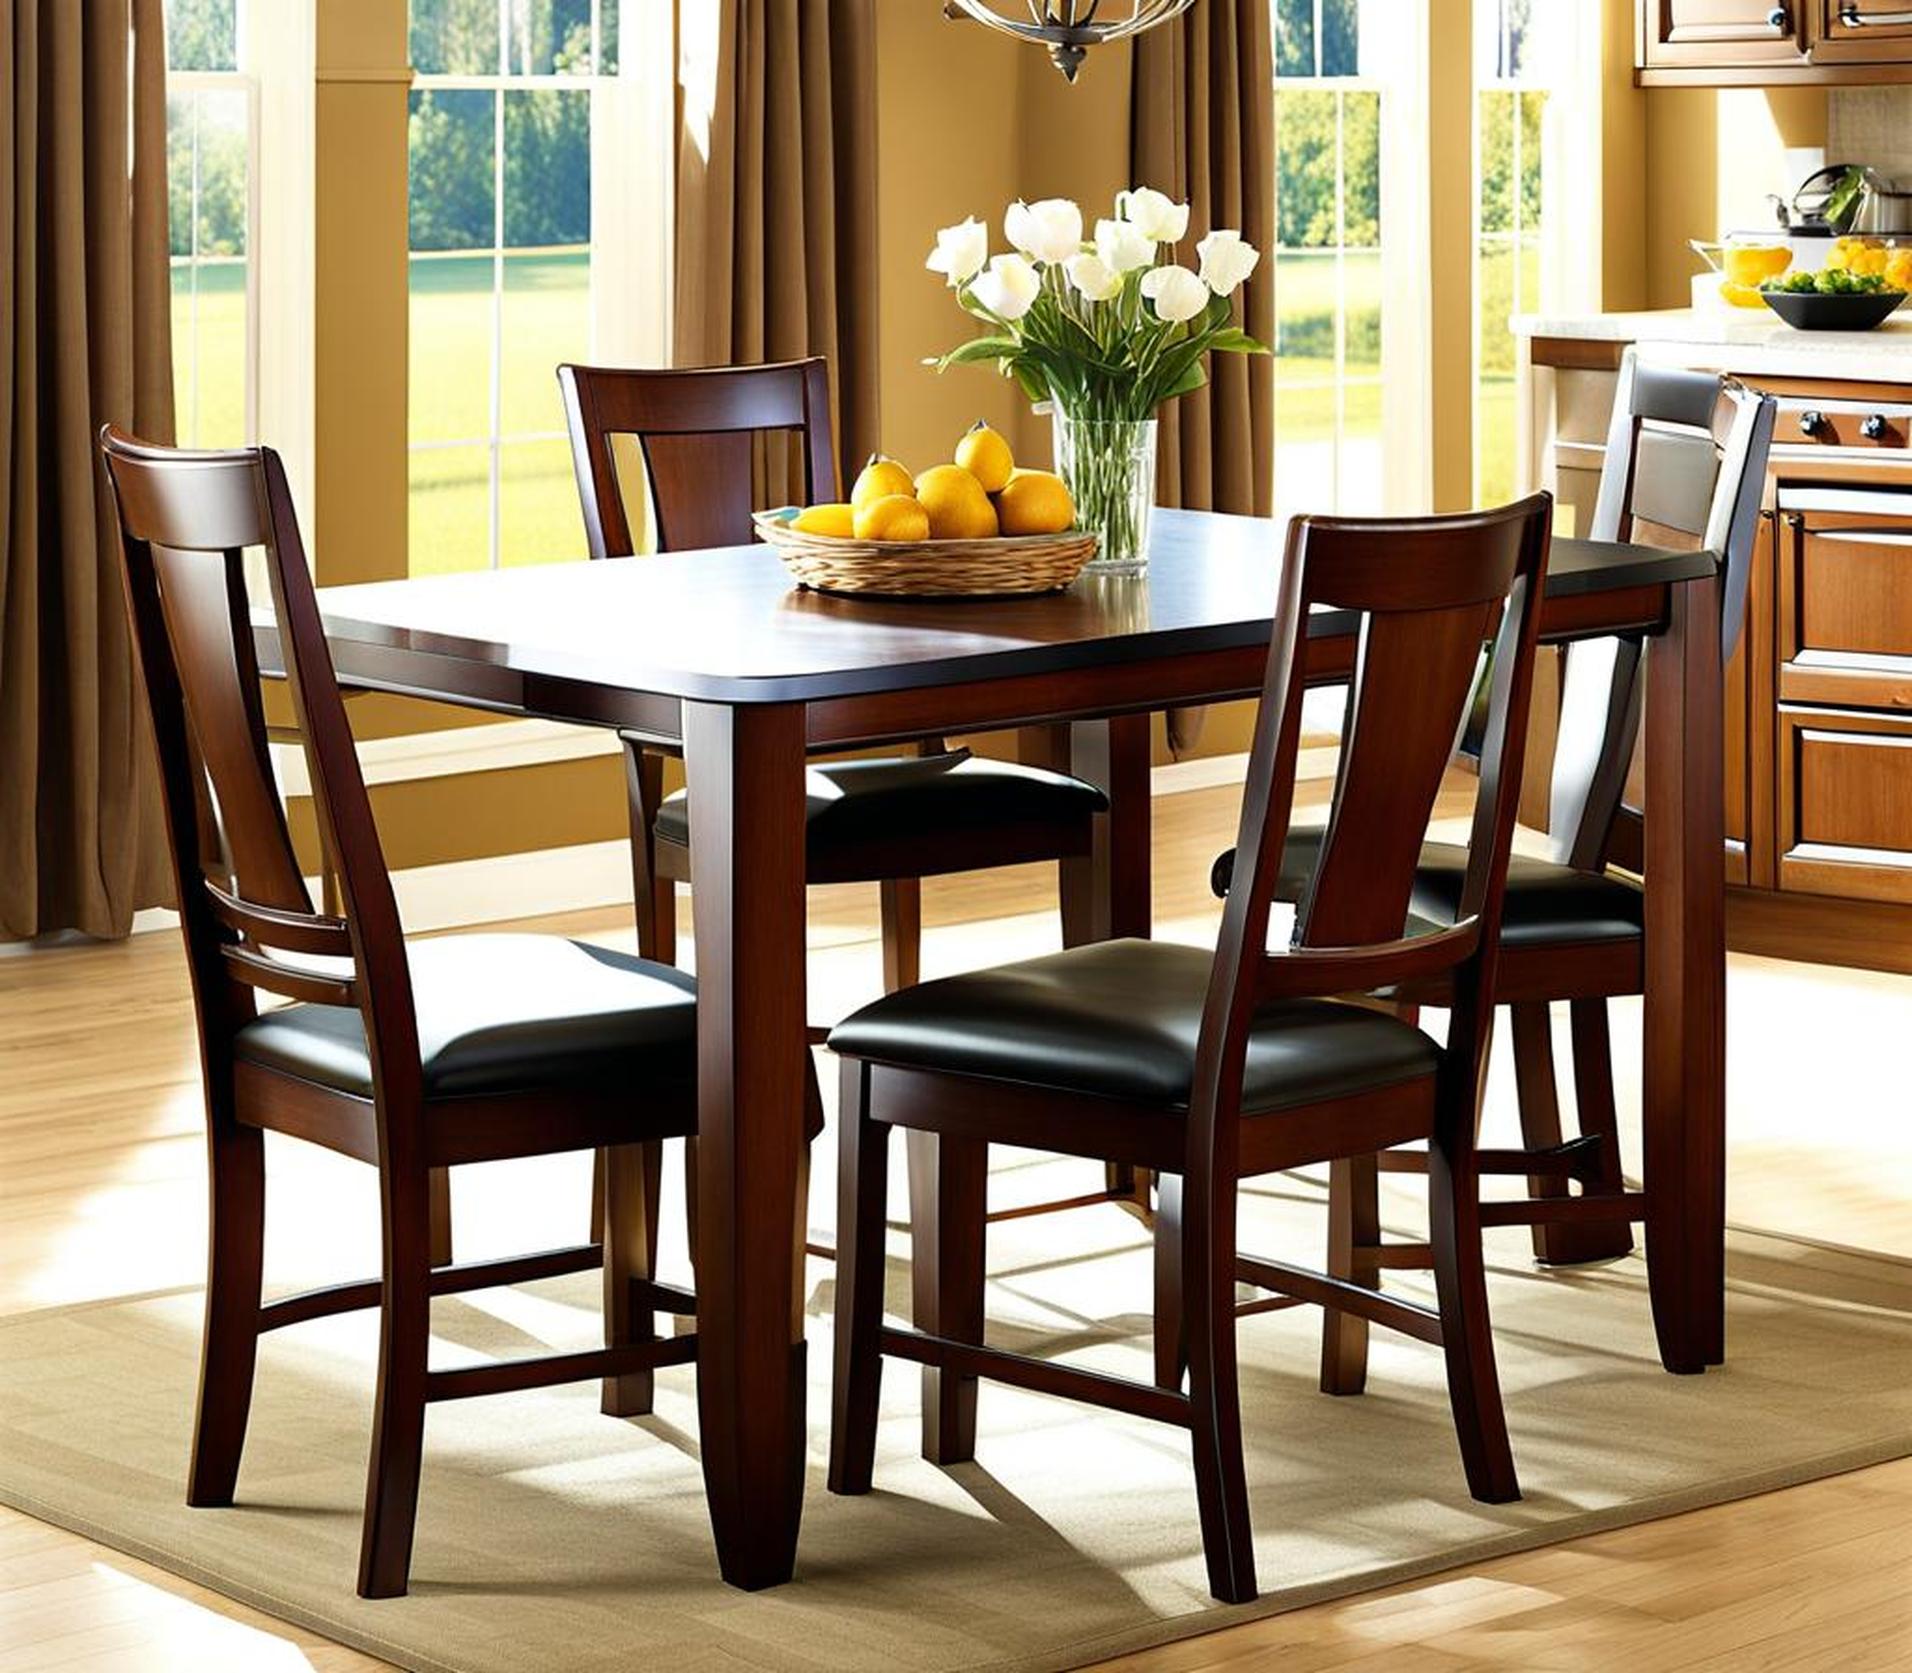 kitchen chairs with arms for elderly